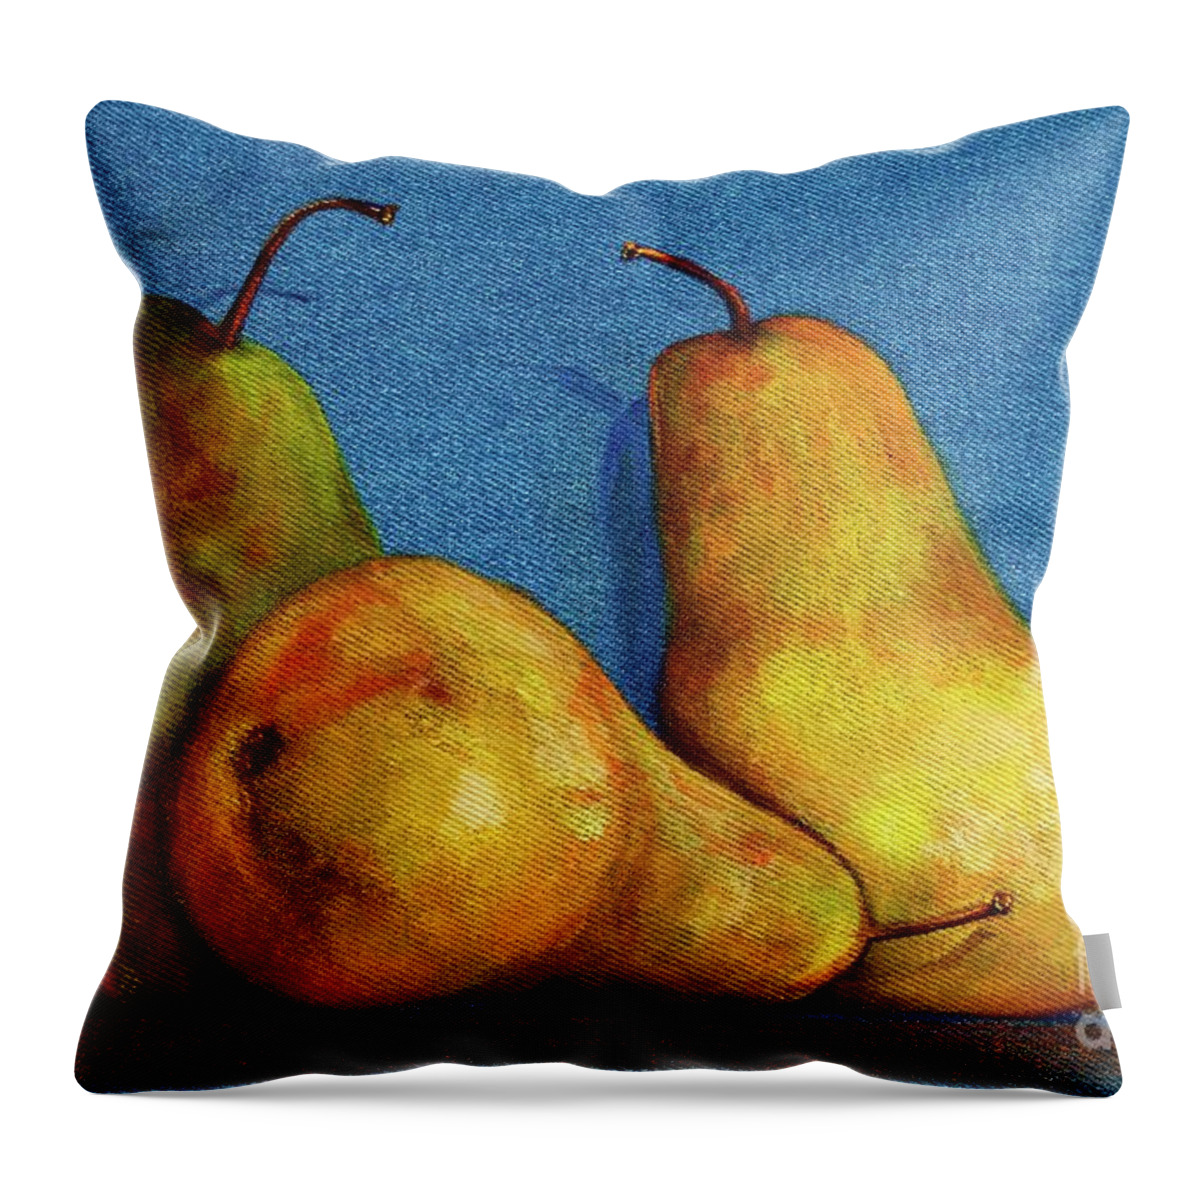 Denim Throw Pillow featuring the painting A Pair Plus One by AnnaJo Vahle